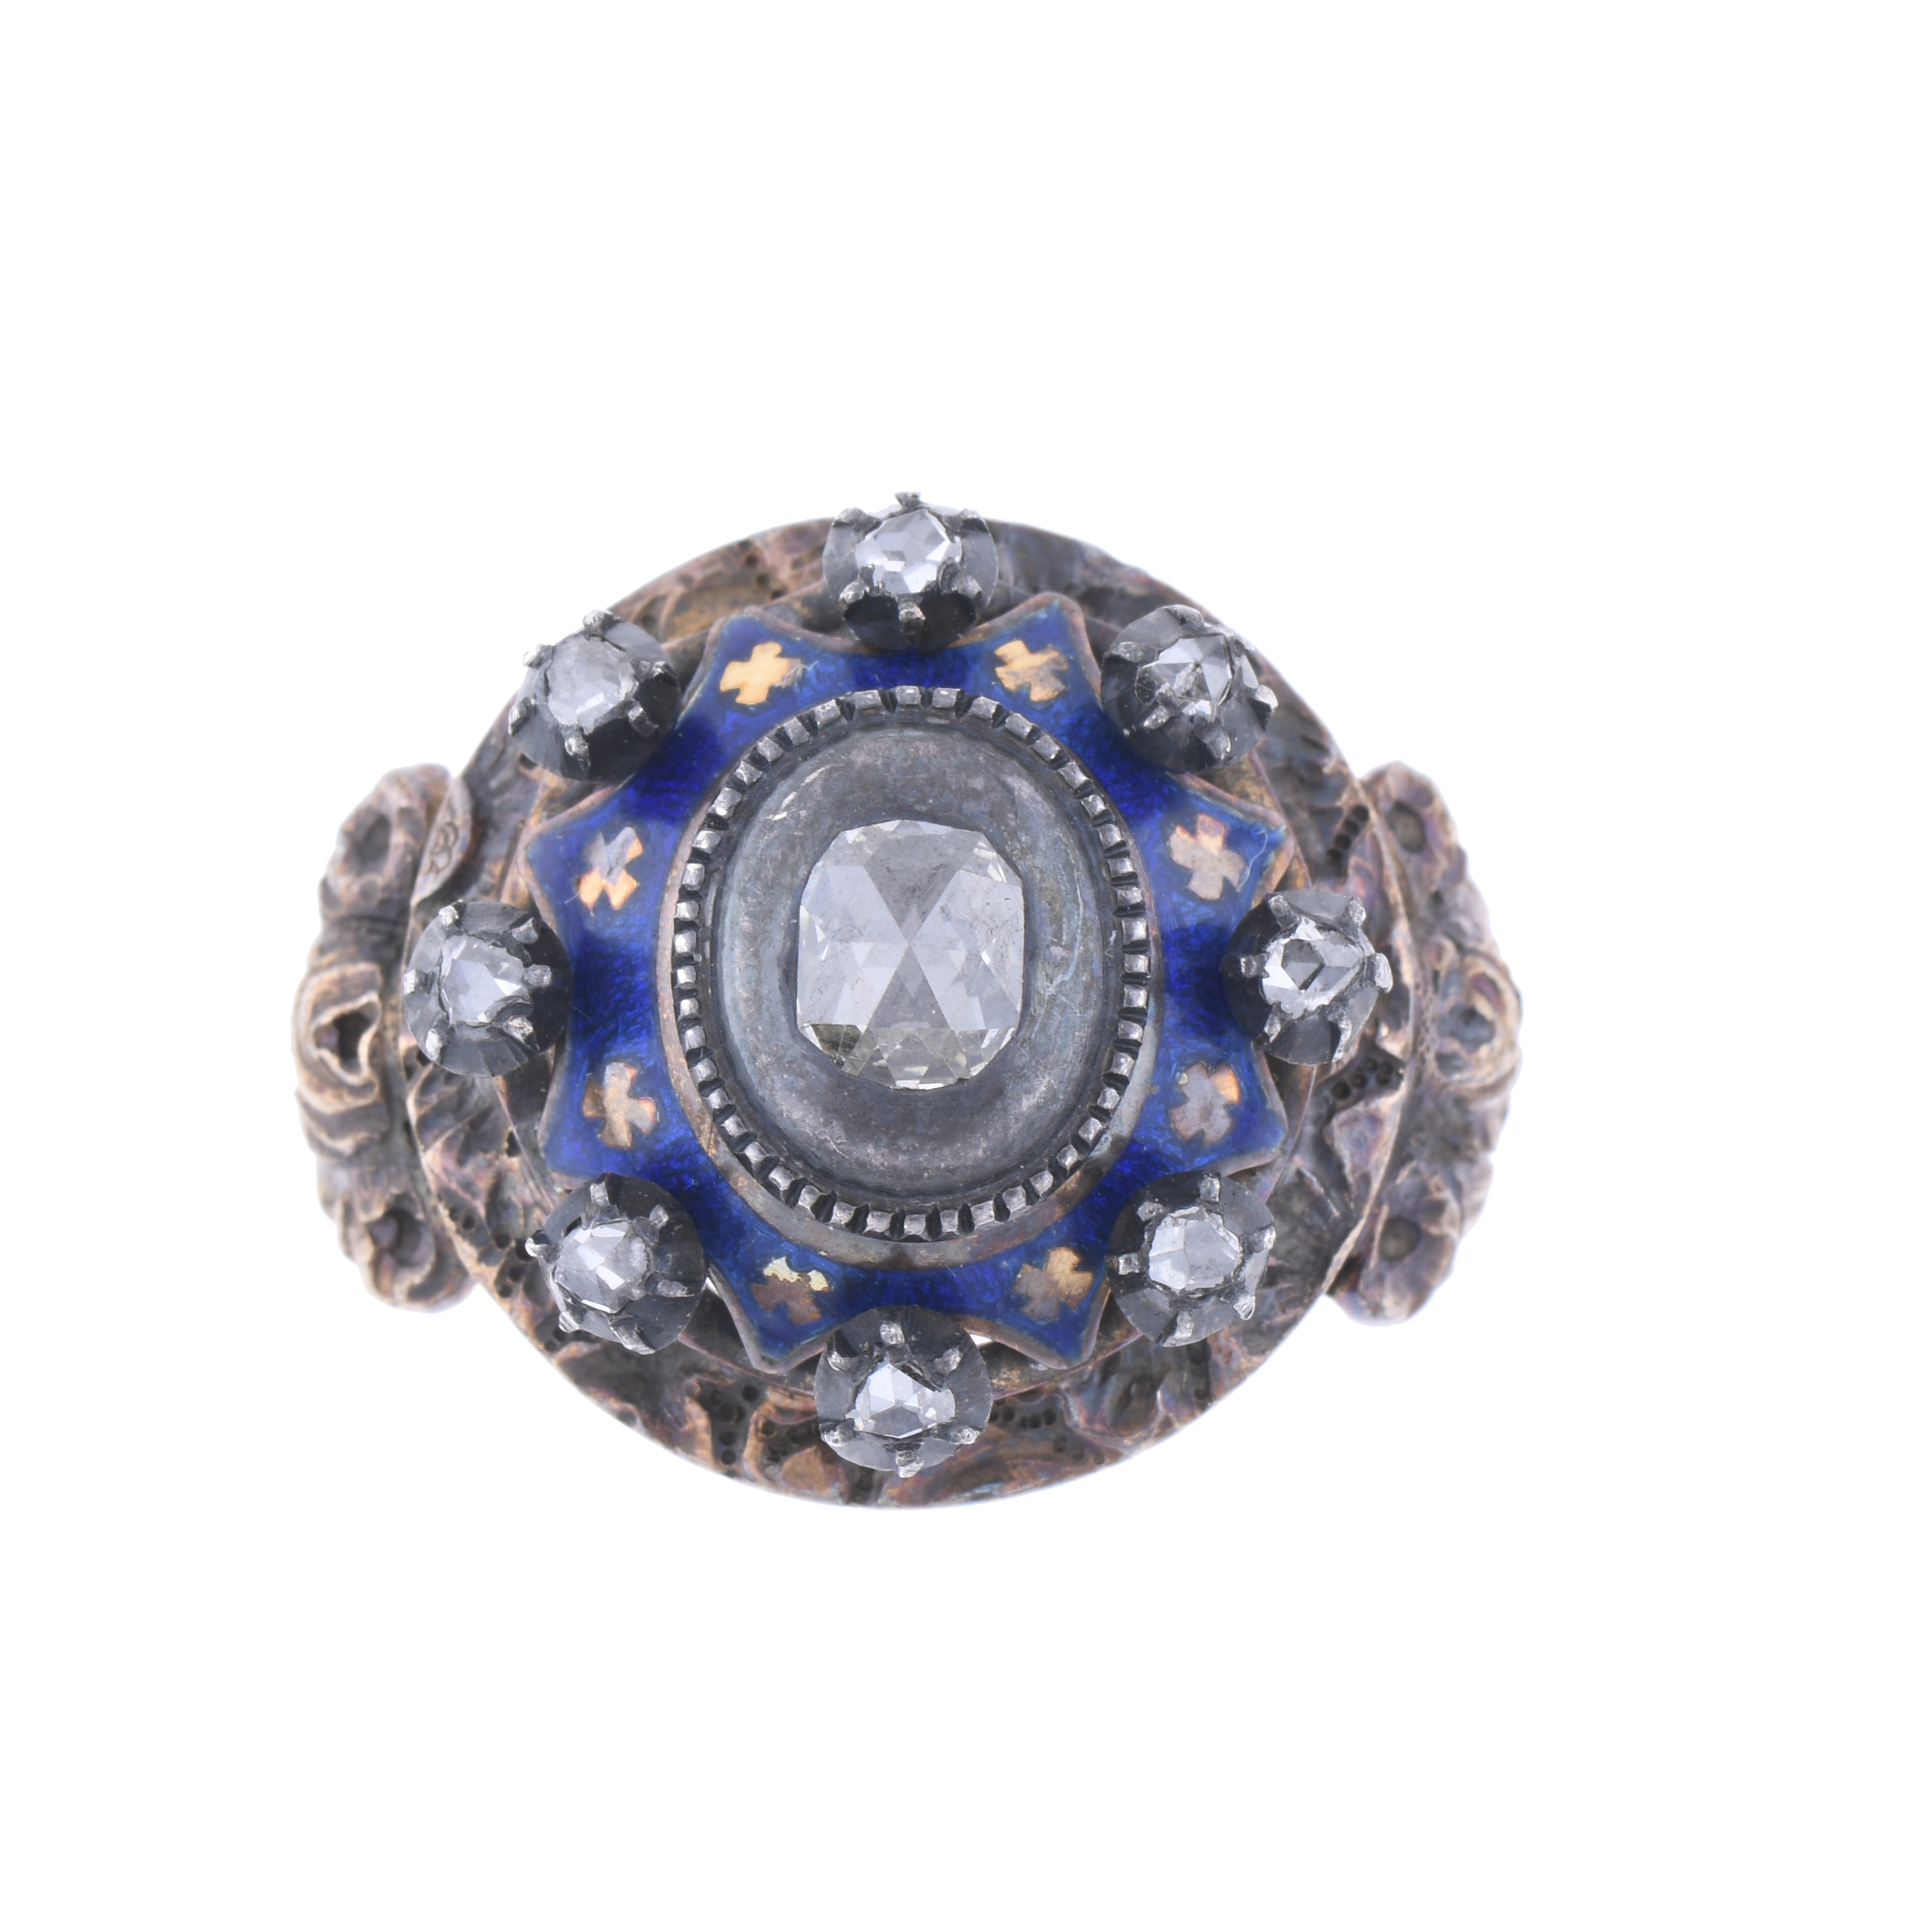 OLD RING WITH ENAMEL AND DIAMONDS.